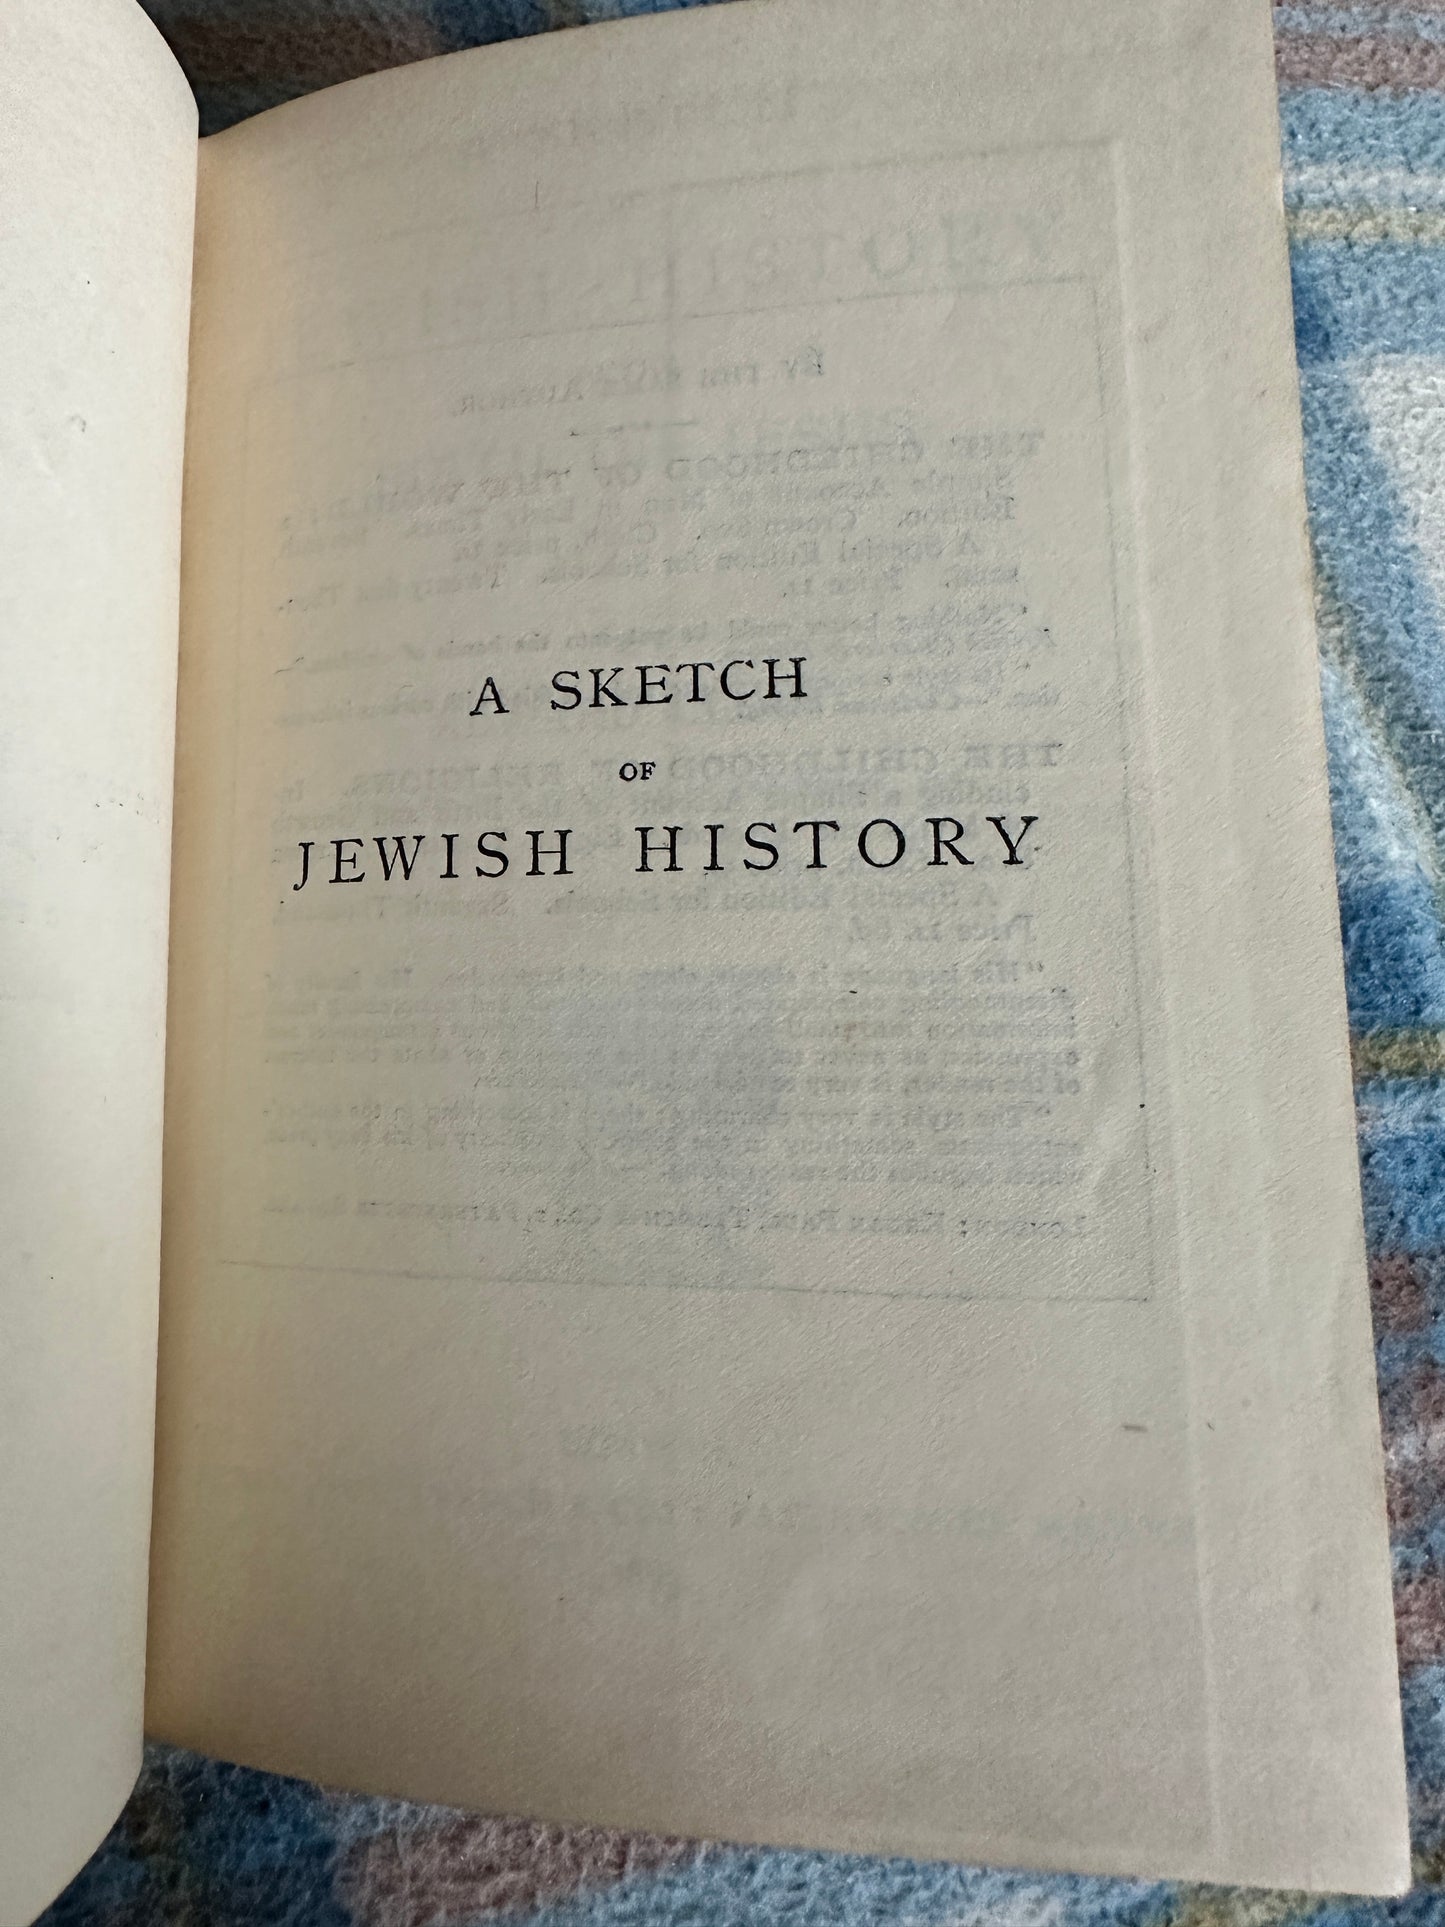 1889 A Sketch of Jewish History To The Birth Of Jesus - Edward Clodd(Kegan Paul, Trench & Co)